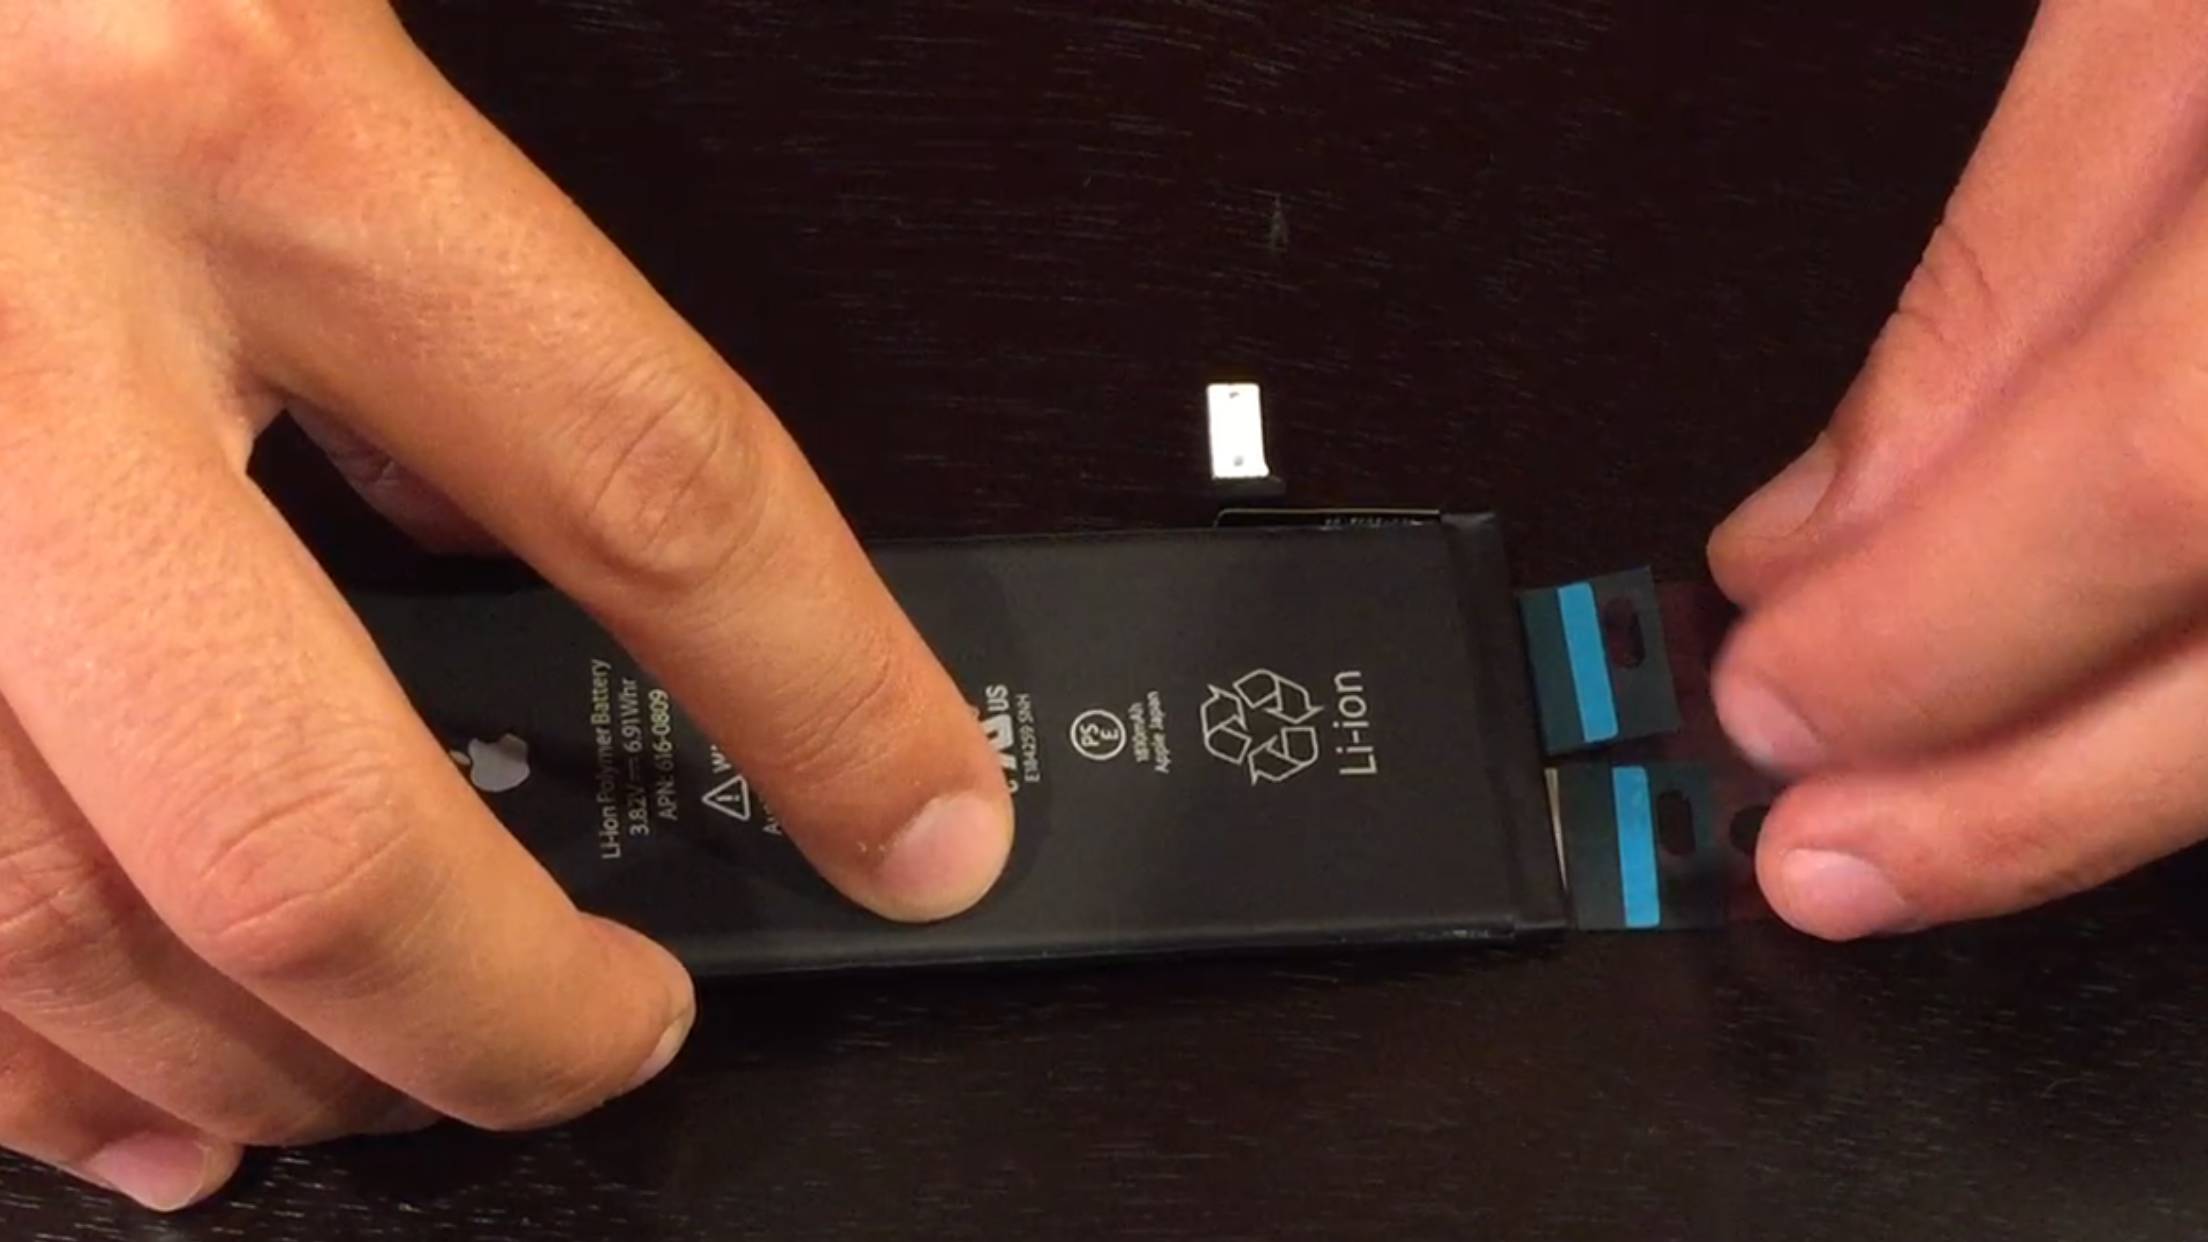 iPhone 5S/5C battery replacement guide - aligning the adhesive